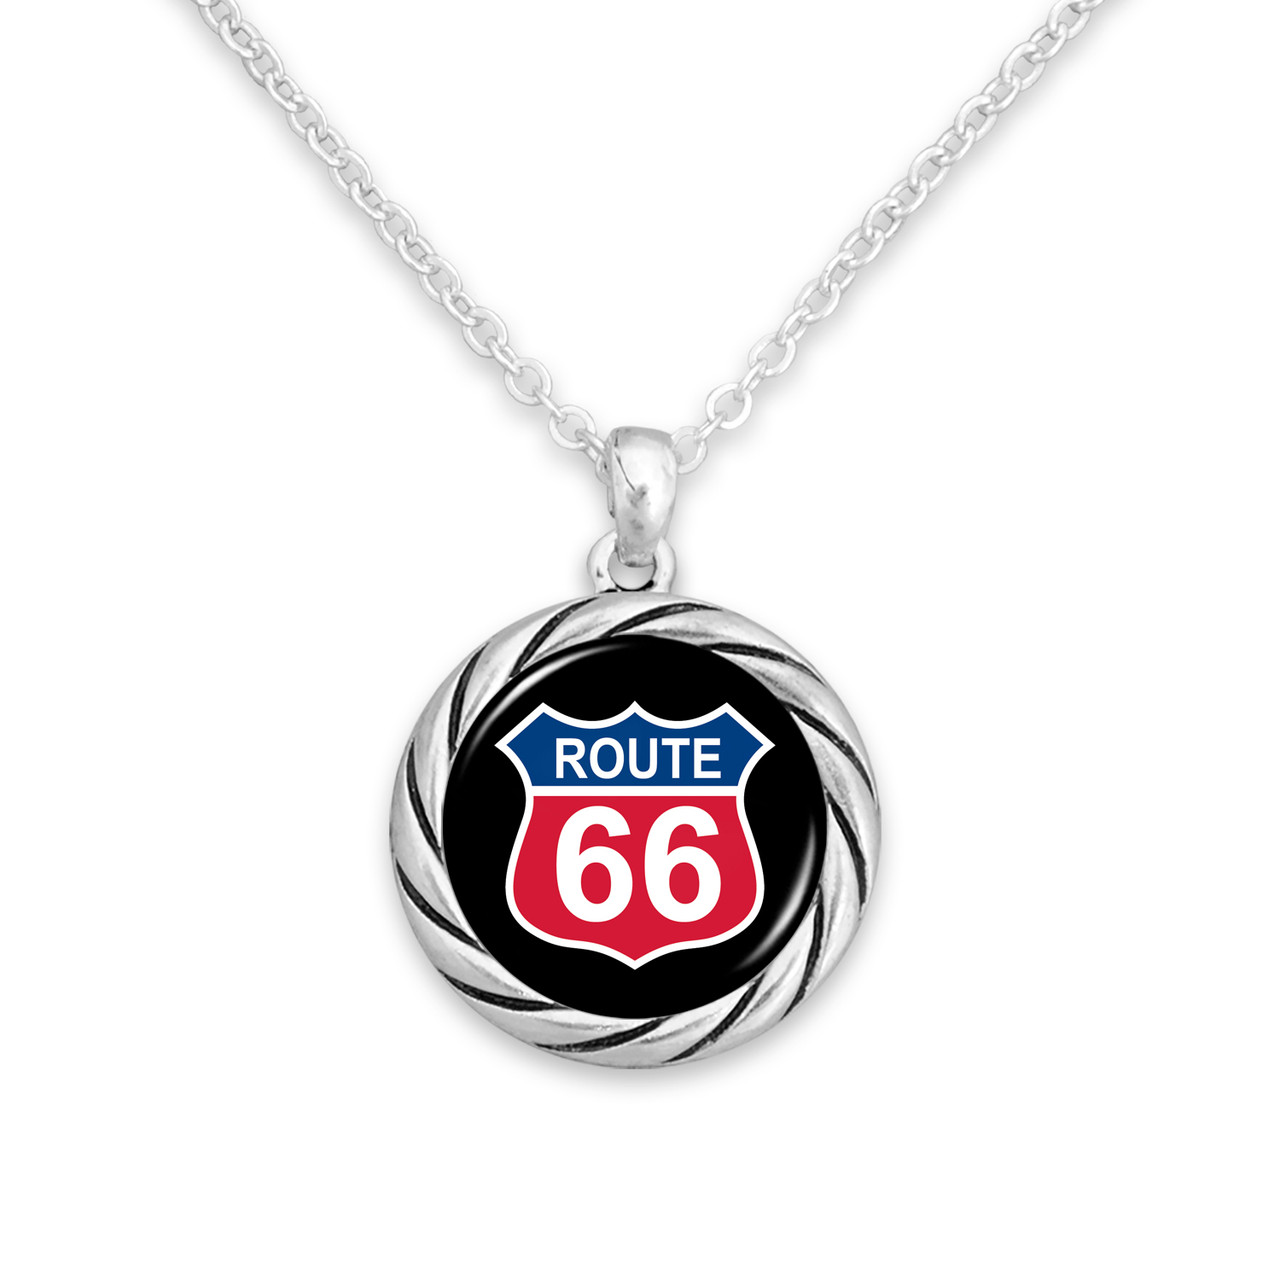 Route 66 Twisted Rope Necklace